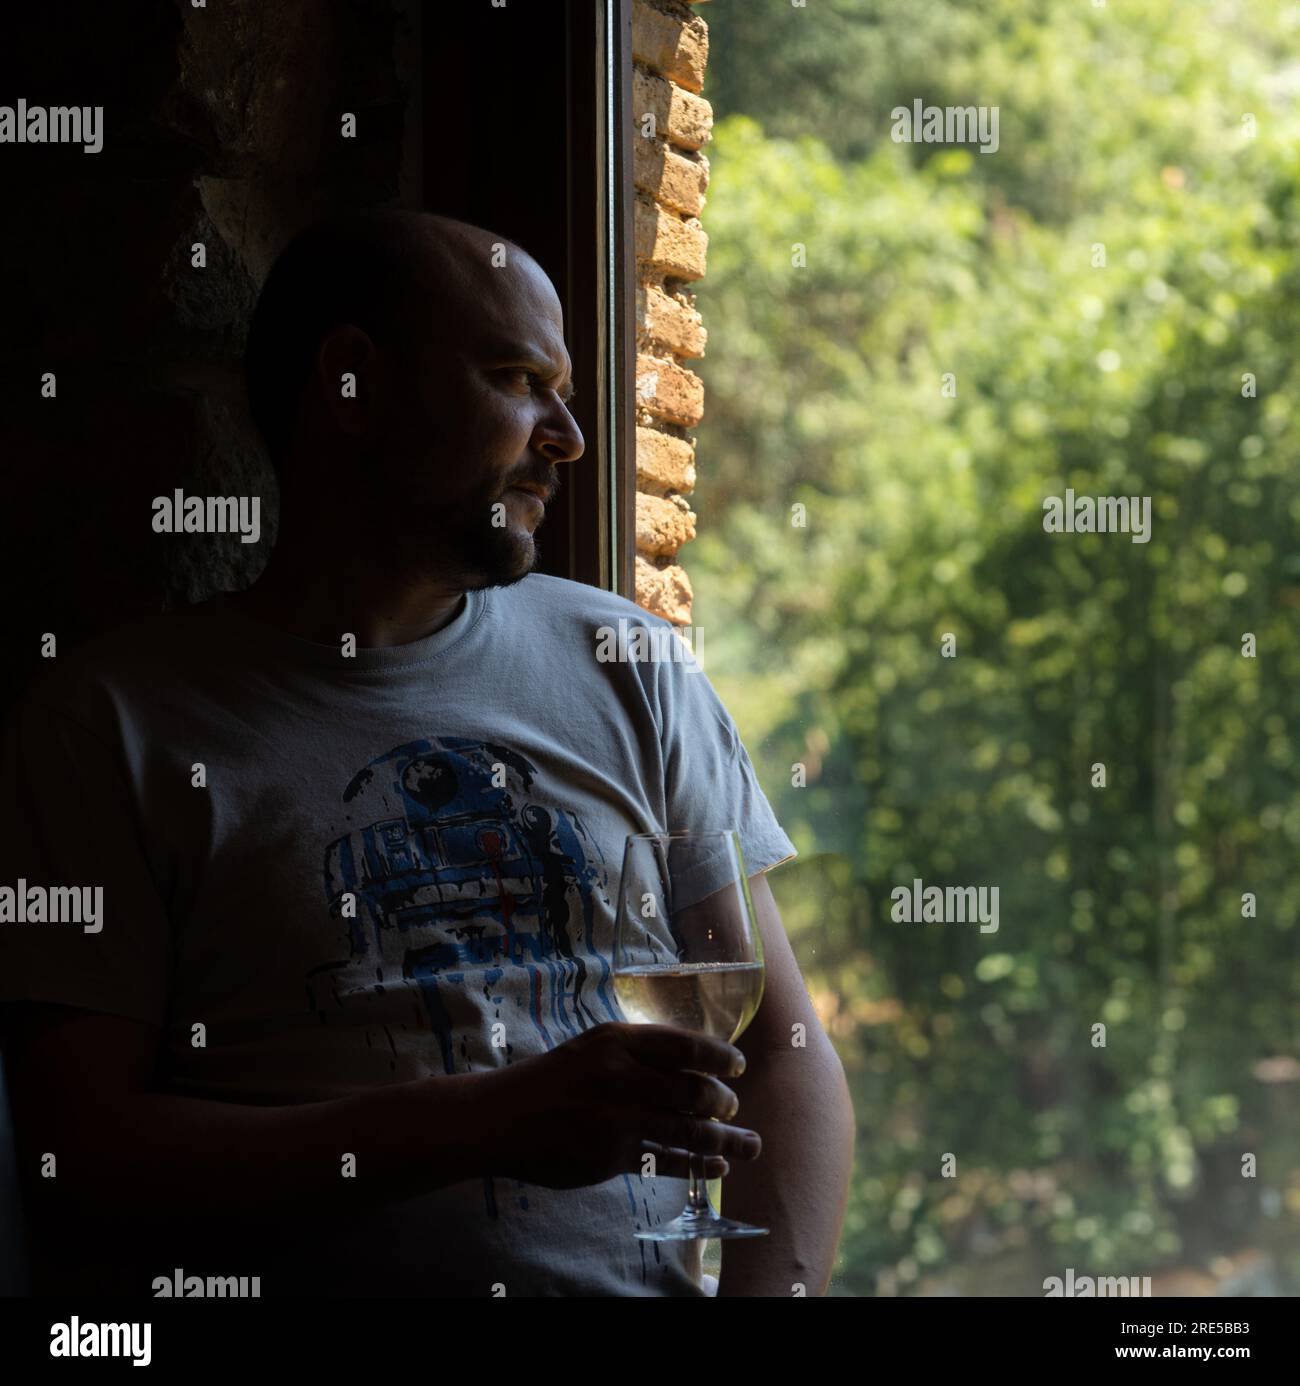 Worried middle-aged man with a glass of white wine in his hand illuminated by a dim evening light looking out a window of a rural house with green tre Stock Photo